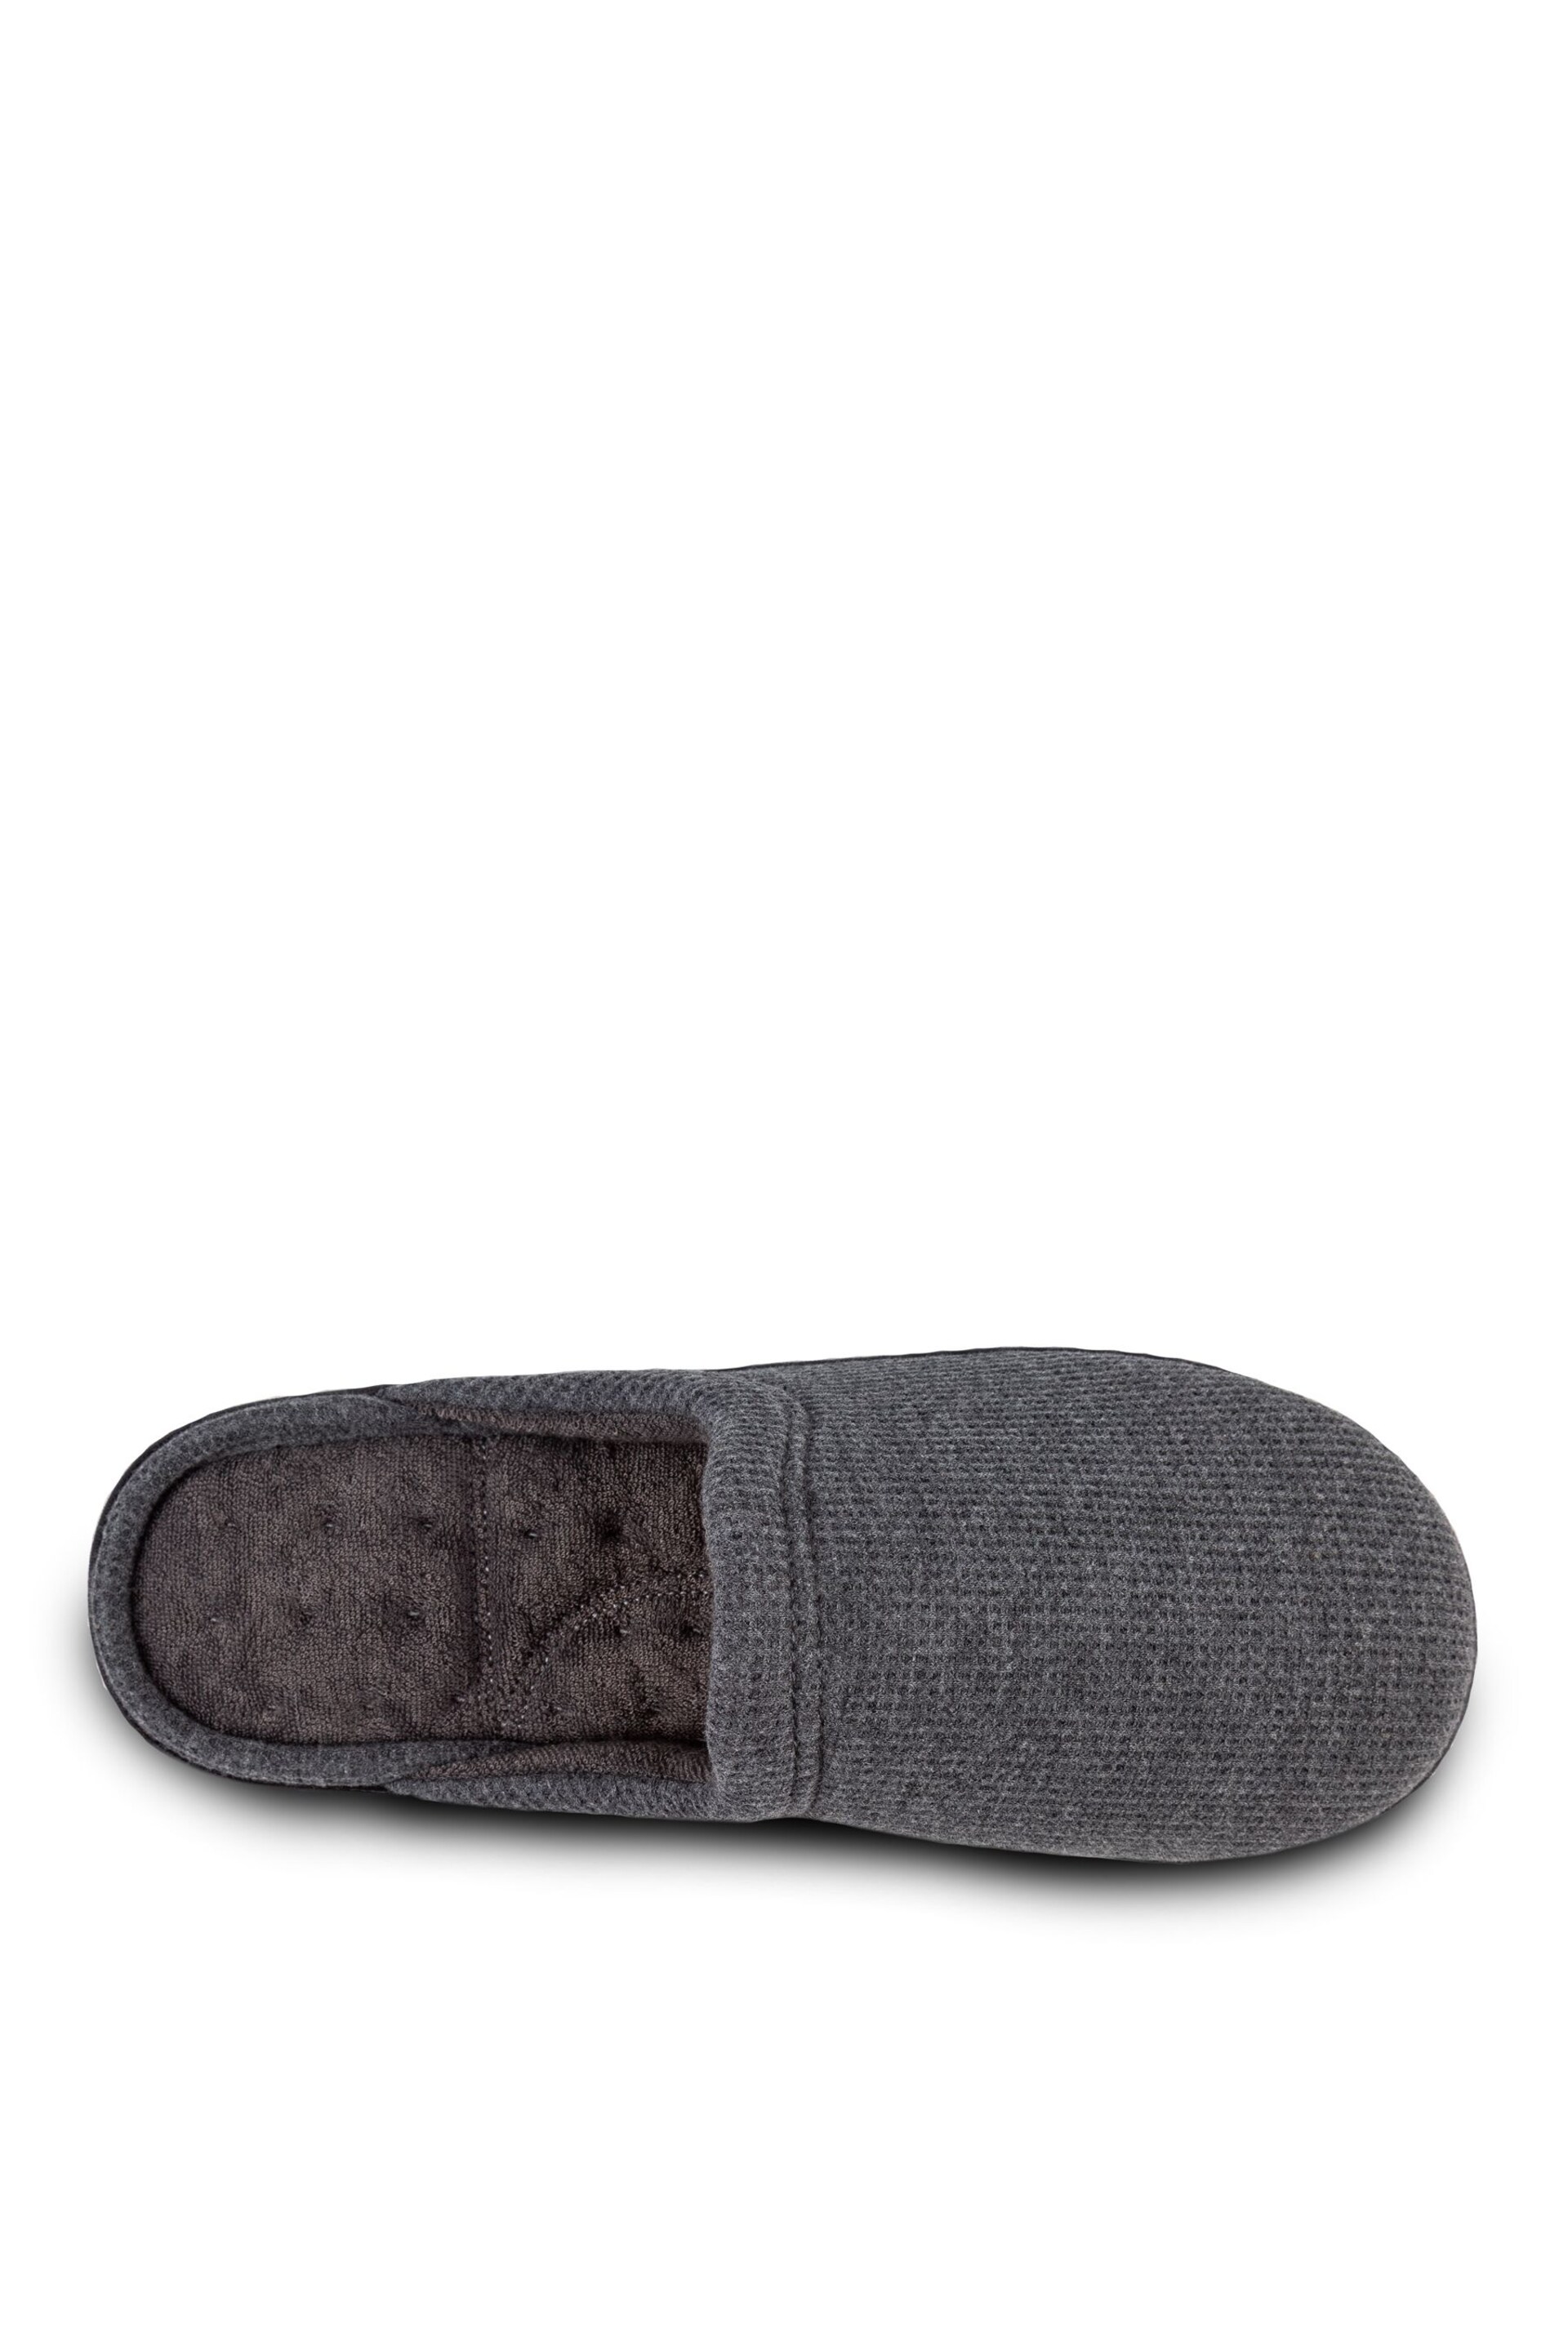 Totes Grey Mens Waffle Mule Slippers - Image 4 of 5